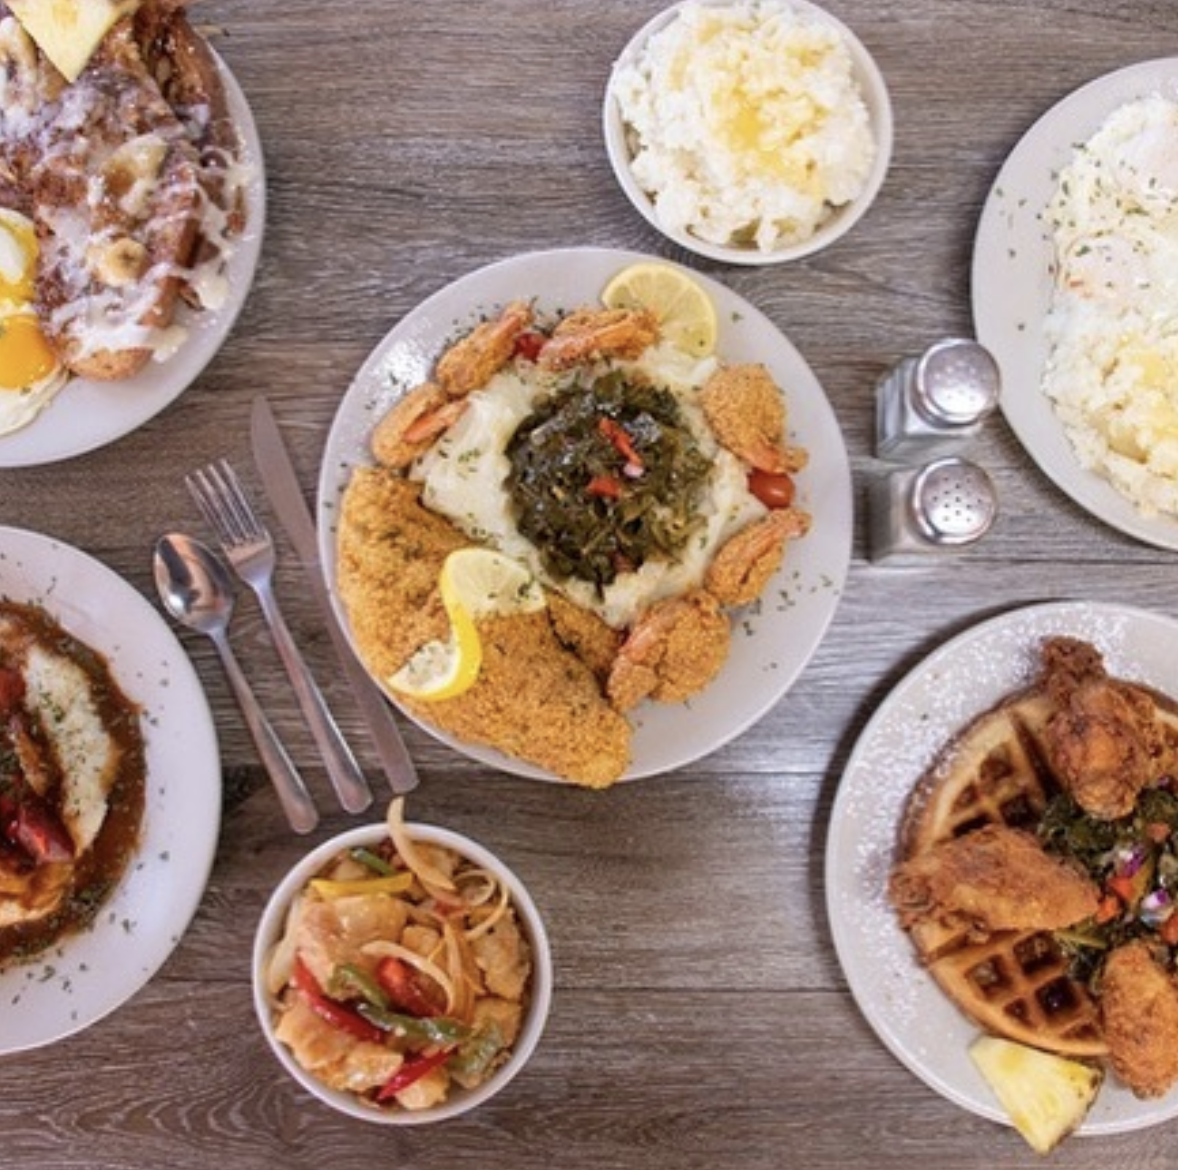 10 MustTry Soul Food Stops in Houston